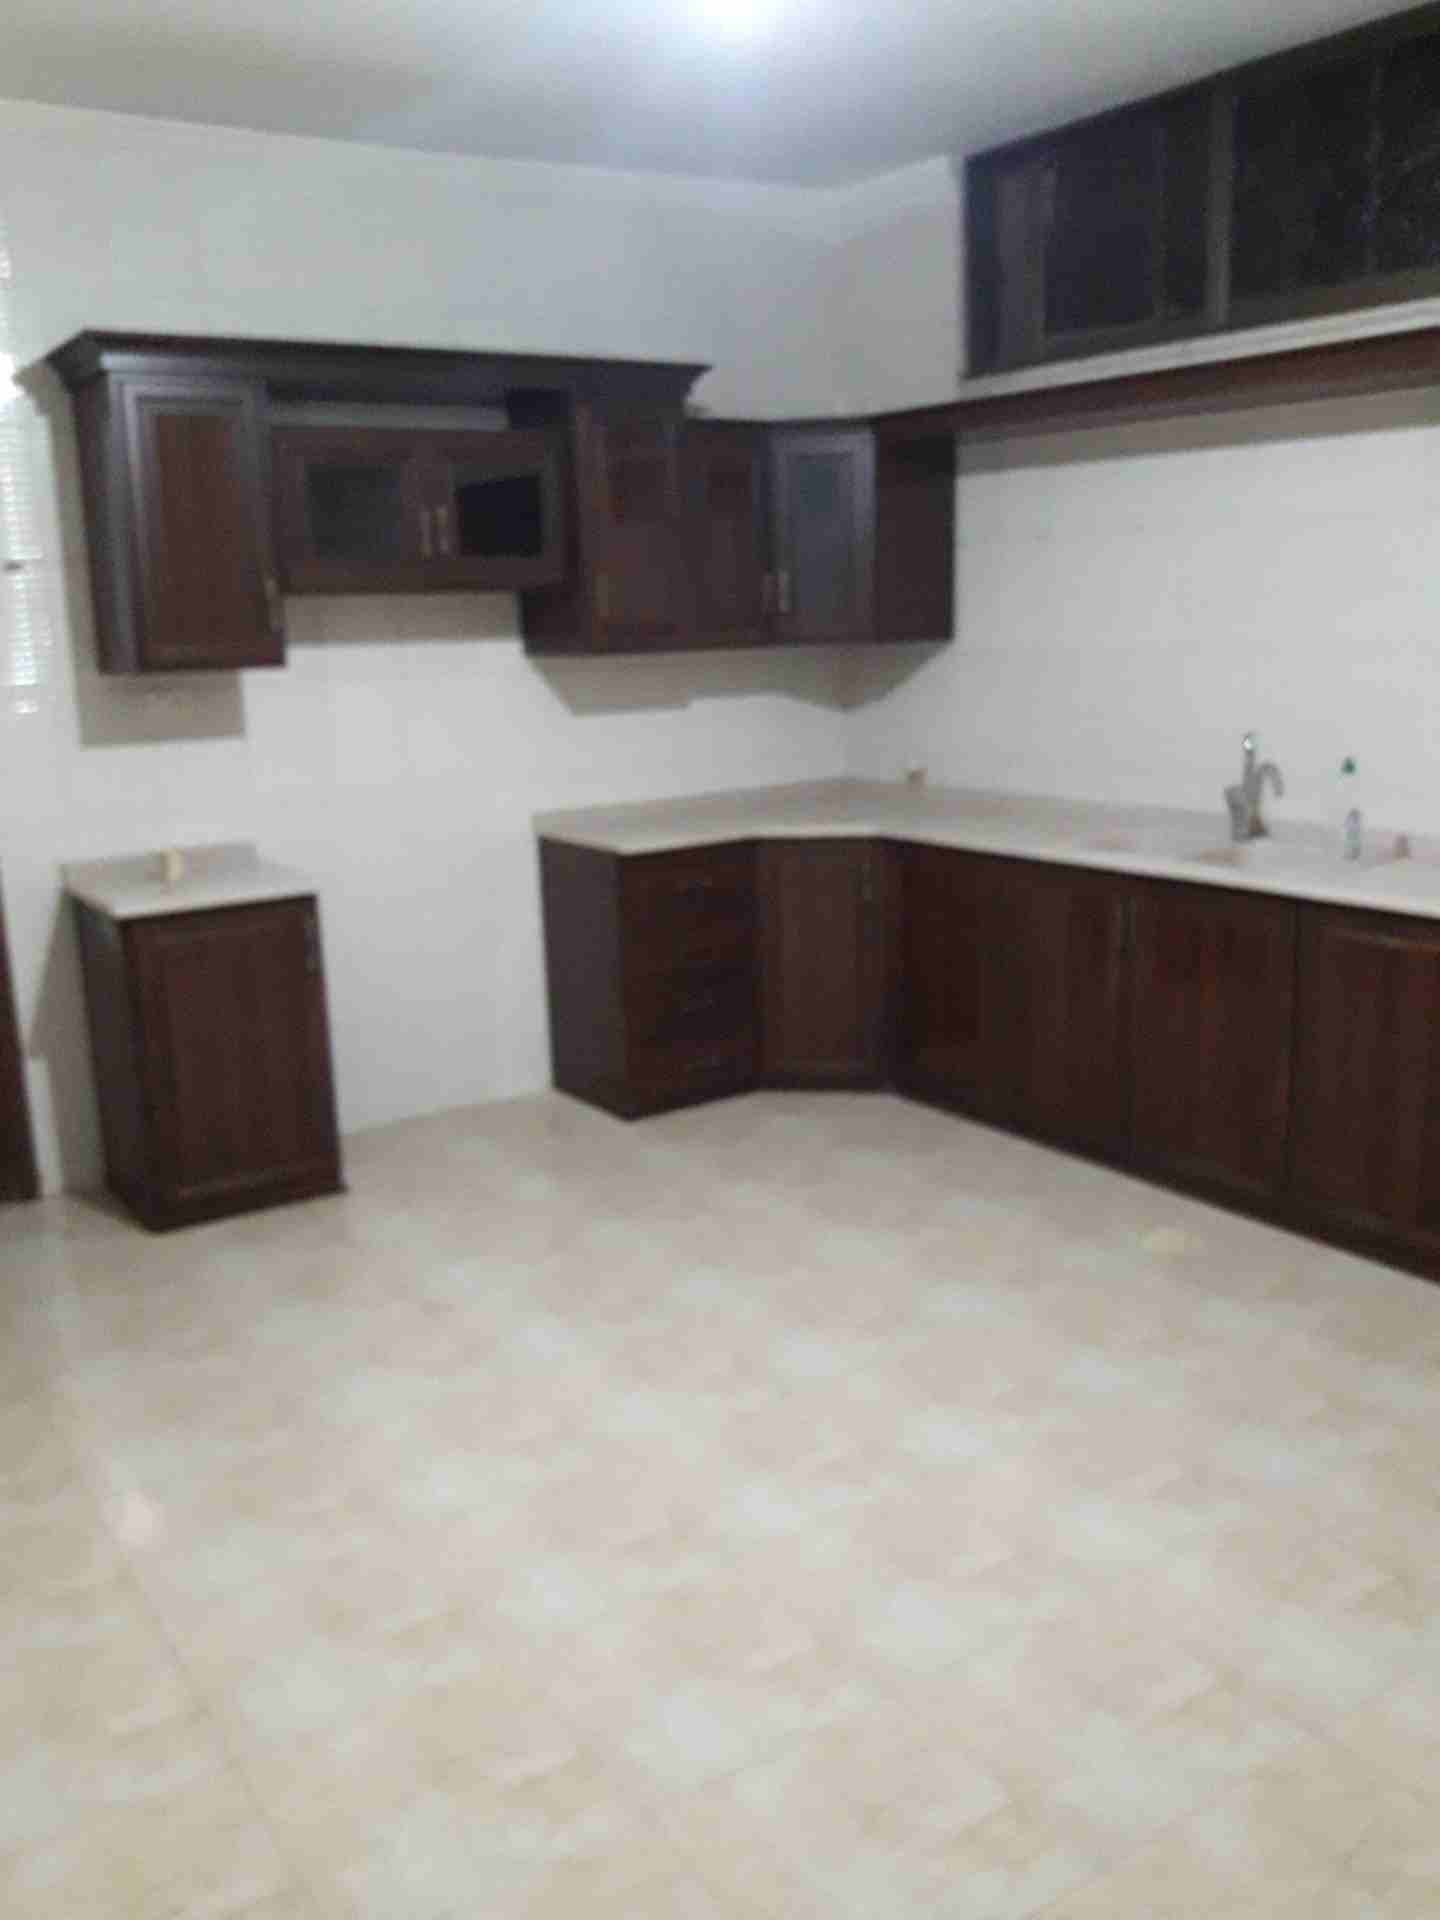 Newly Furnished! Monthly Payments! Downtown Living!-  3 نوم شقة ارضية فارغة...